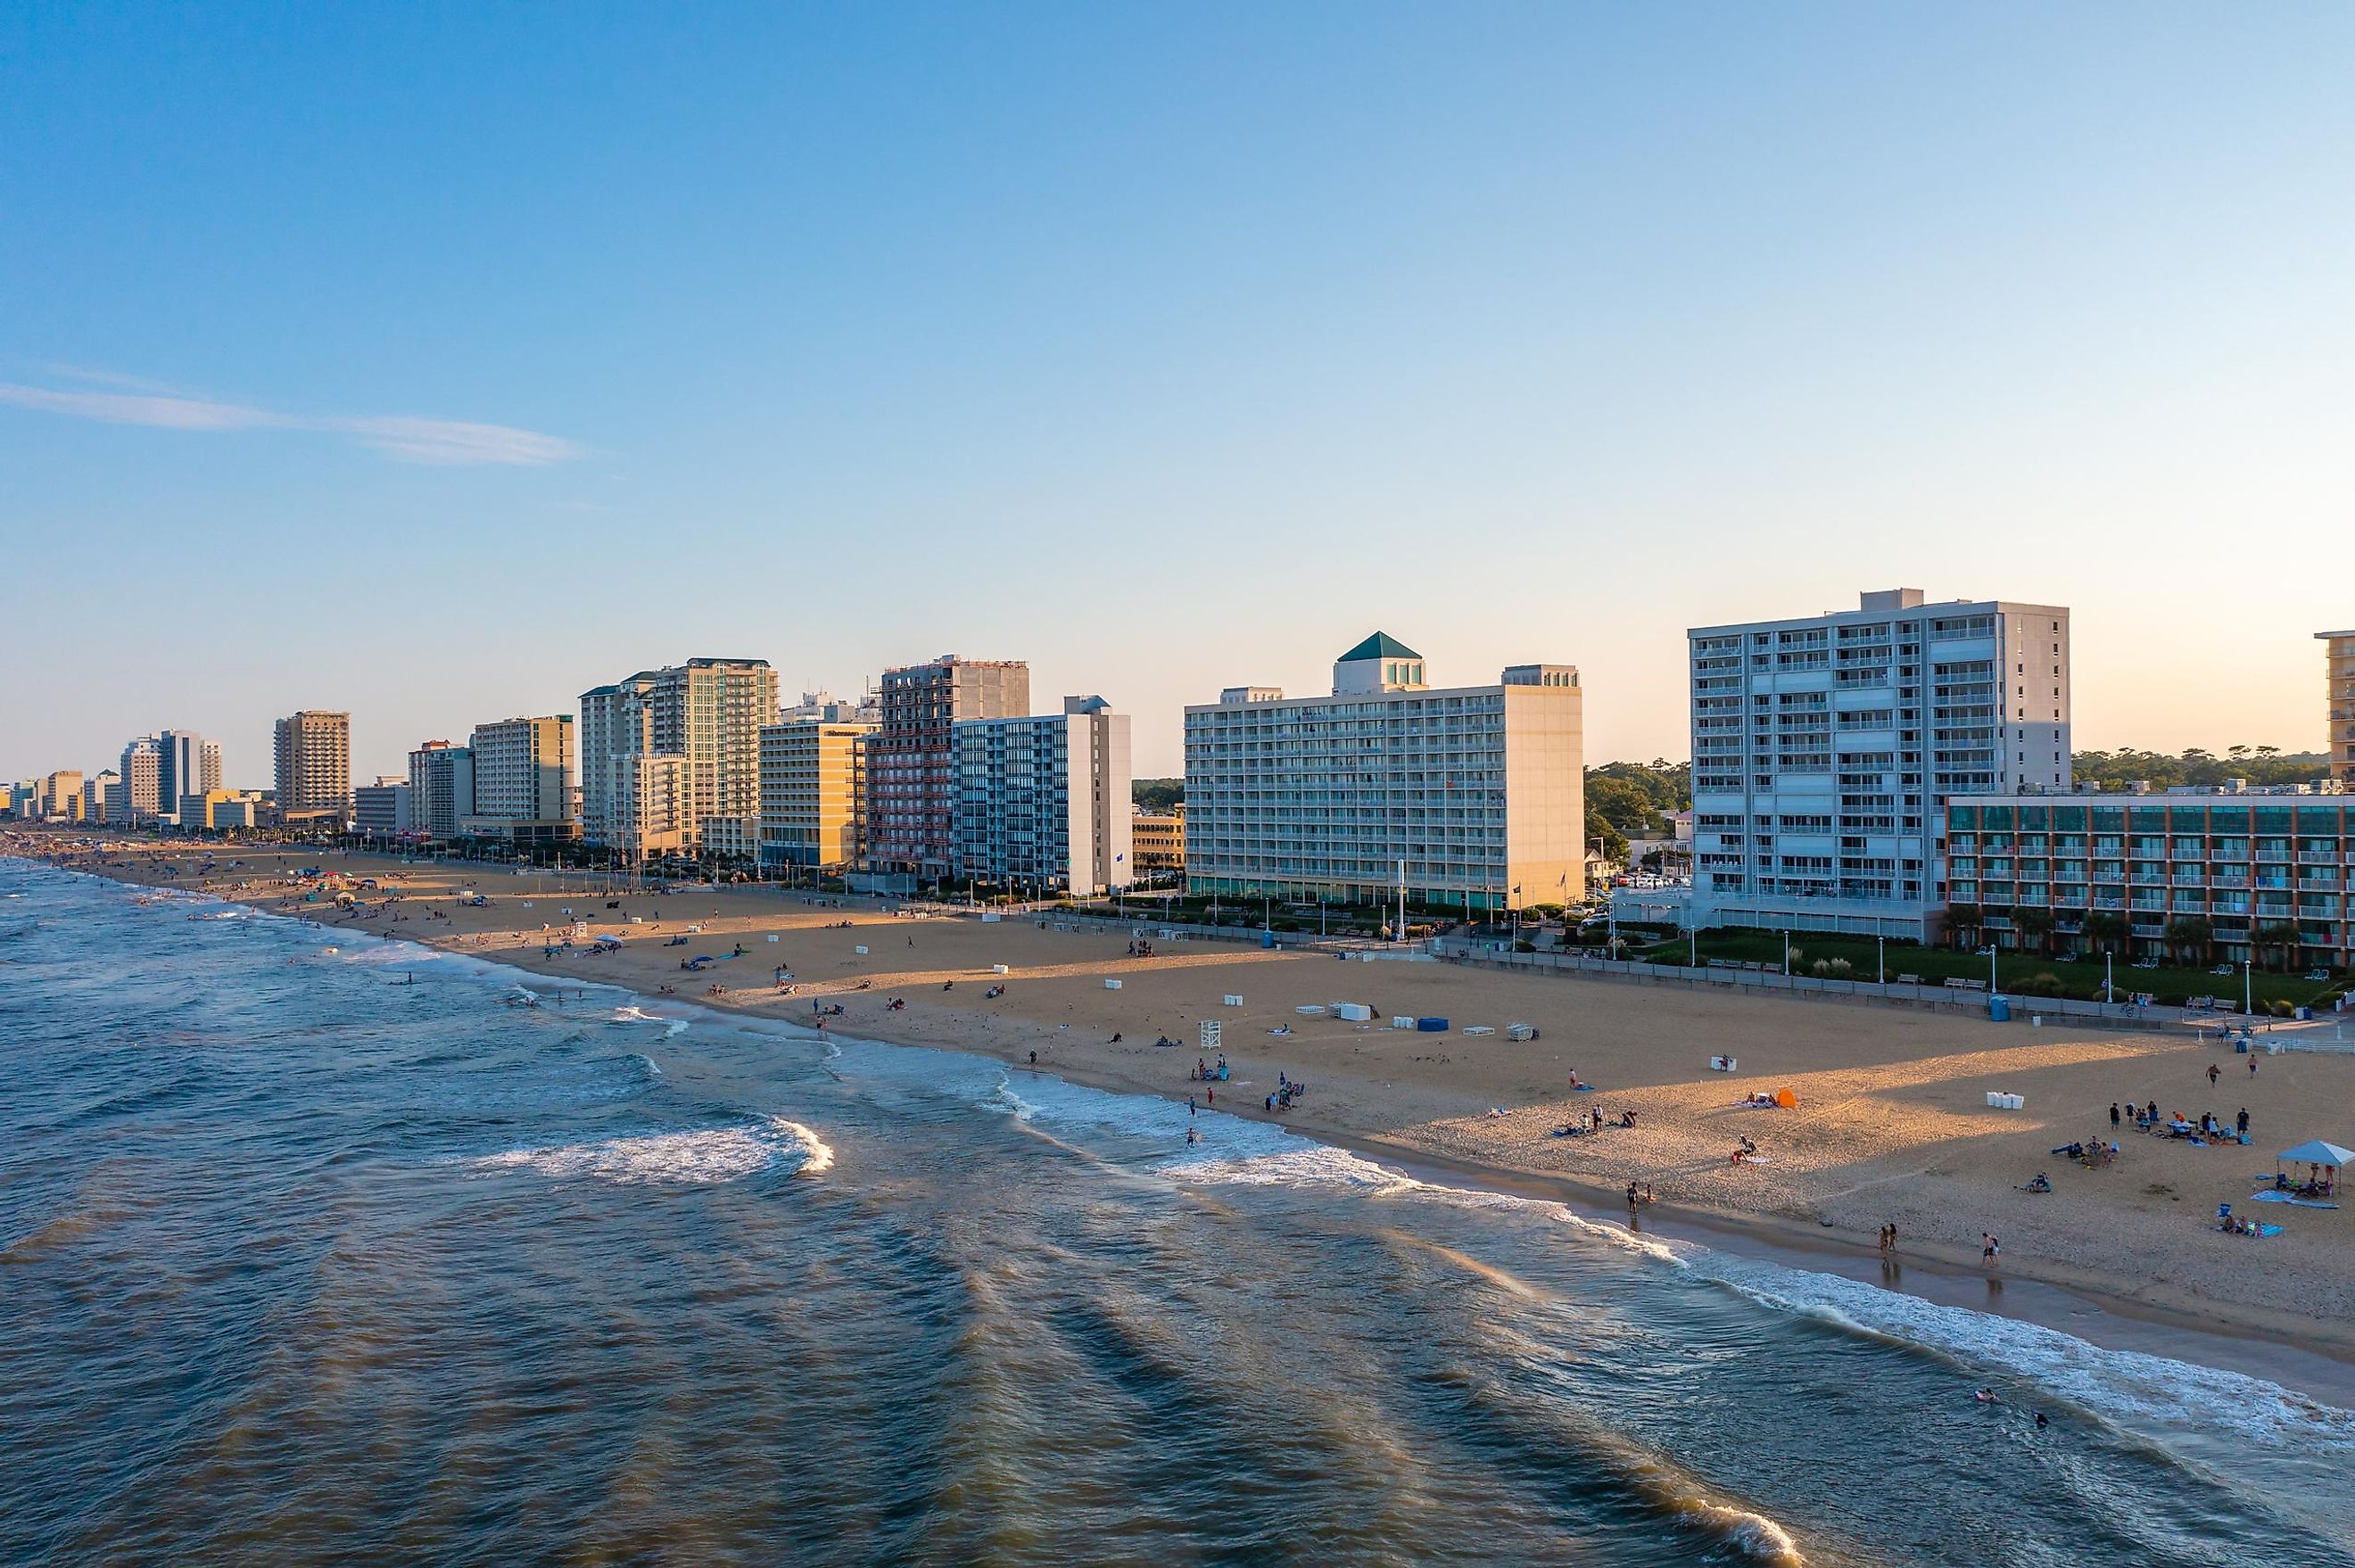 Aerial view of the skyline of the Virginia Beach cceanfront